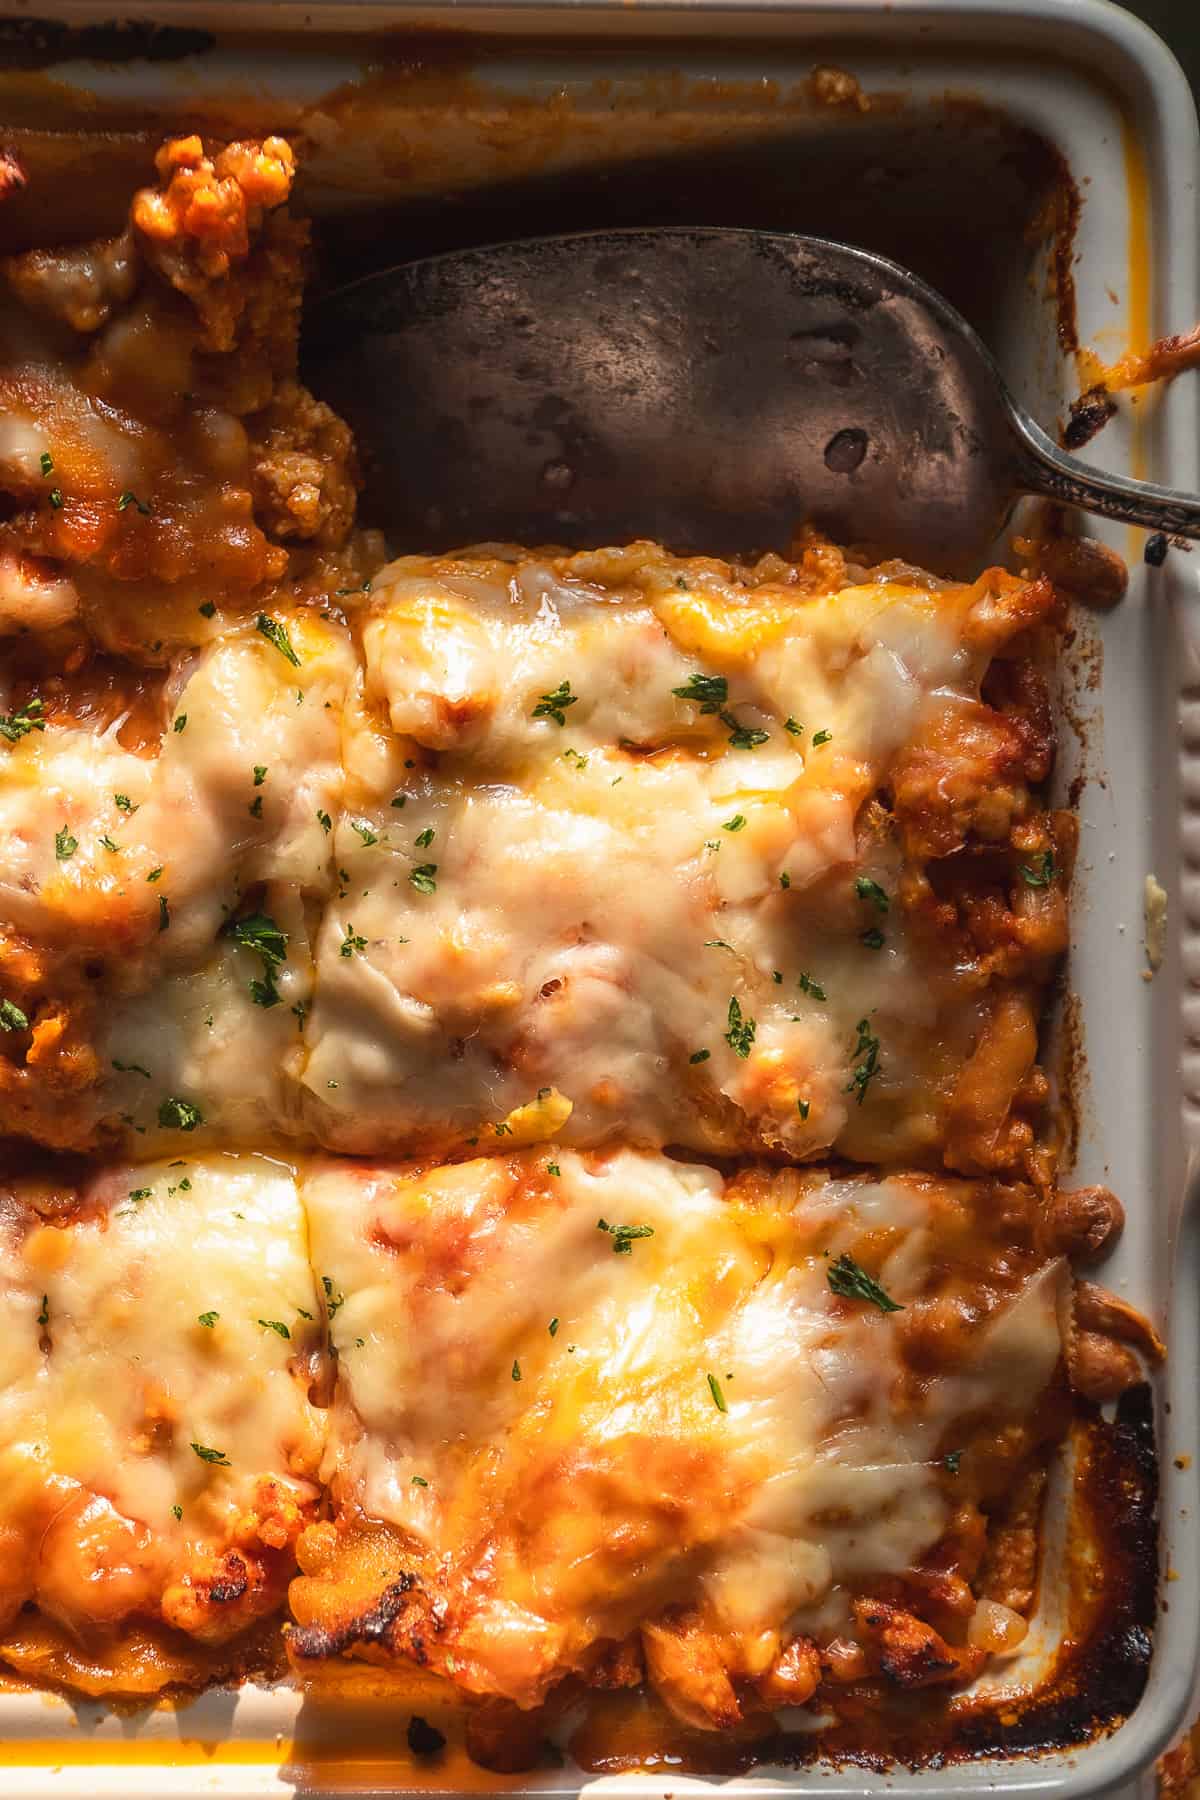 Gluten free lasagna in a baking dish with cheese on top.